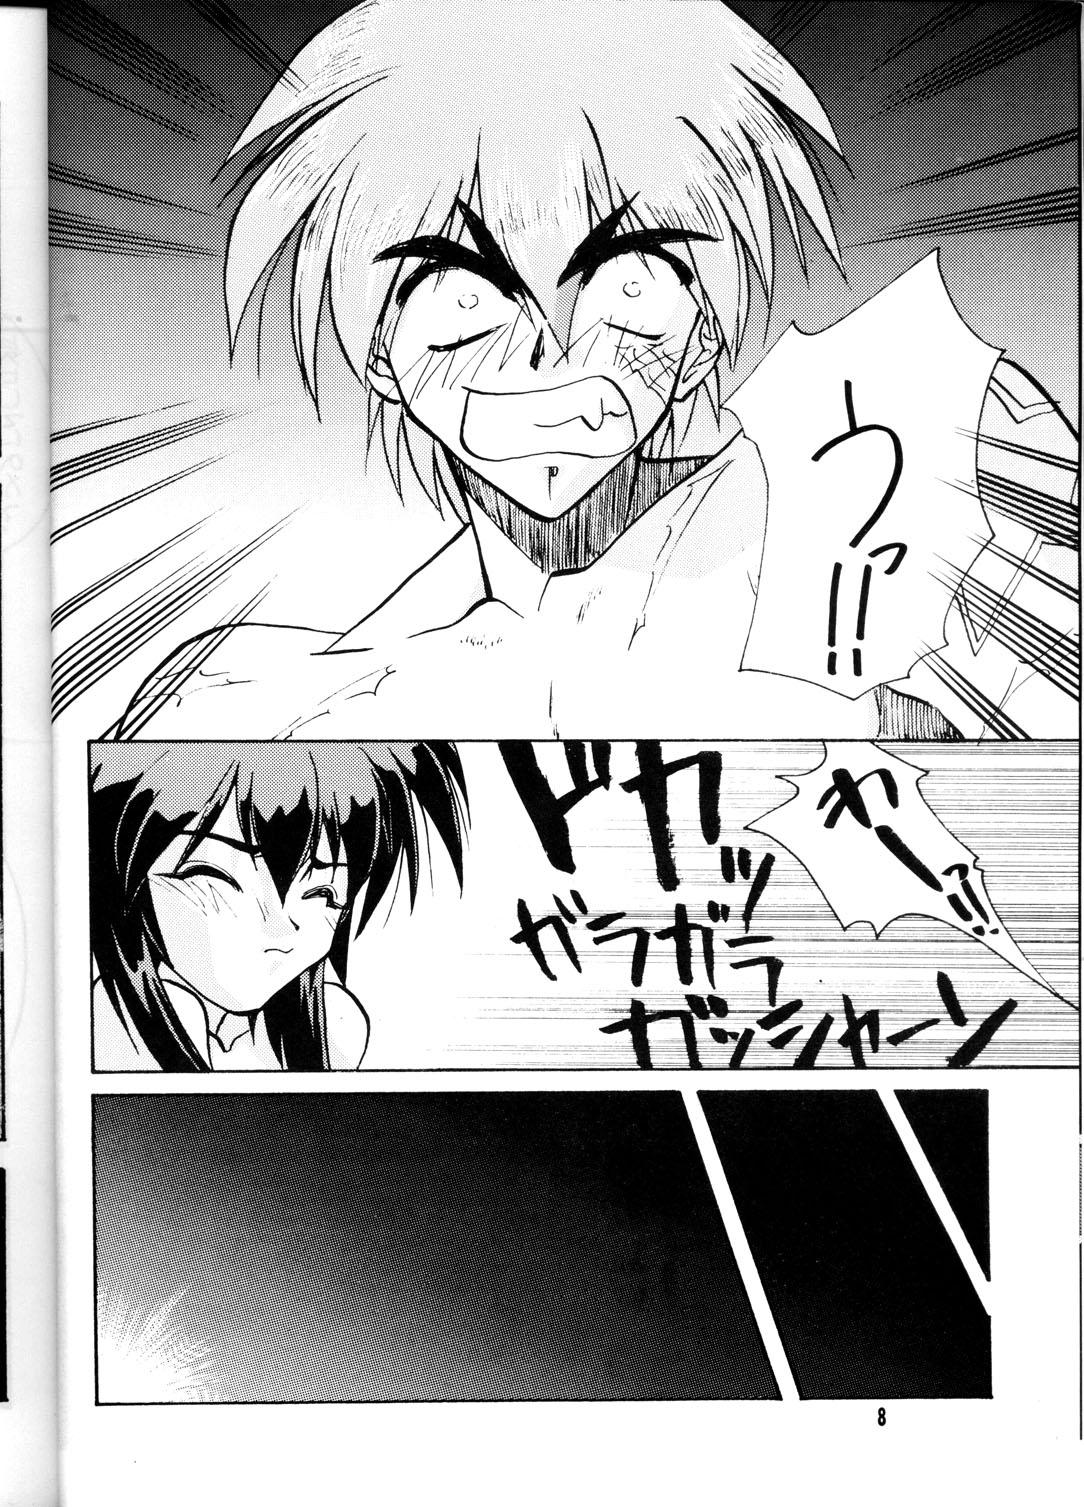 Mask OUTLAW STAR - Slayers Outlaw star All purpose cultural cat girl nuku nuku Gay Straight Boys - Page 7